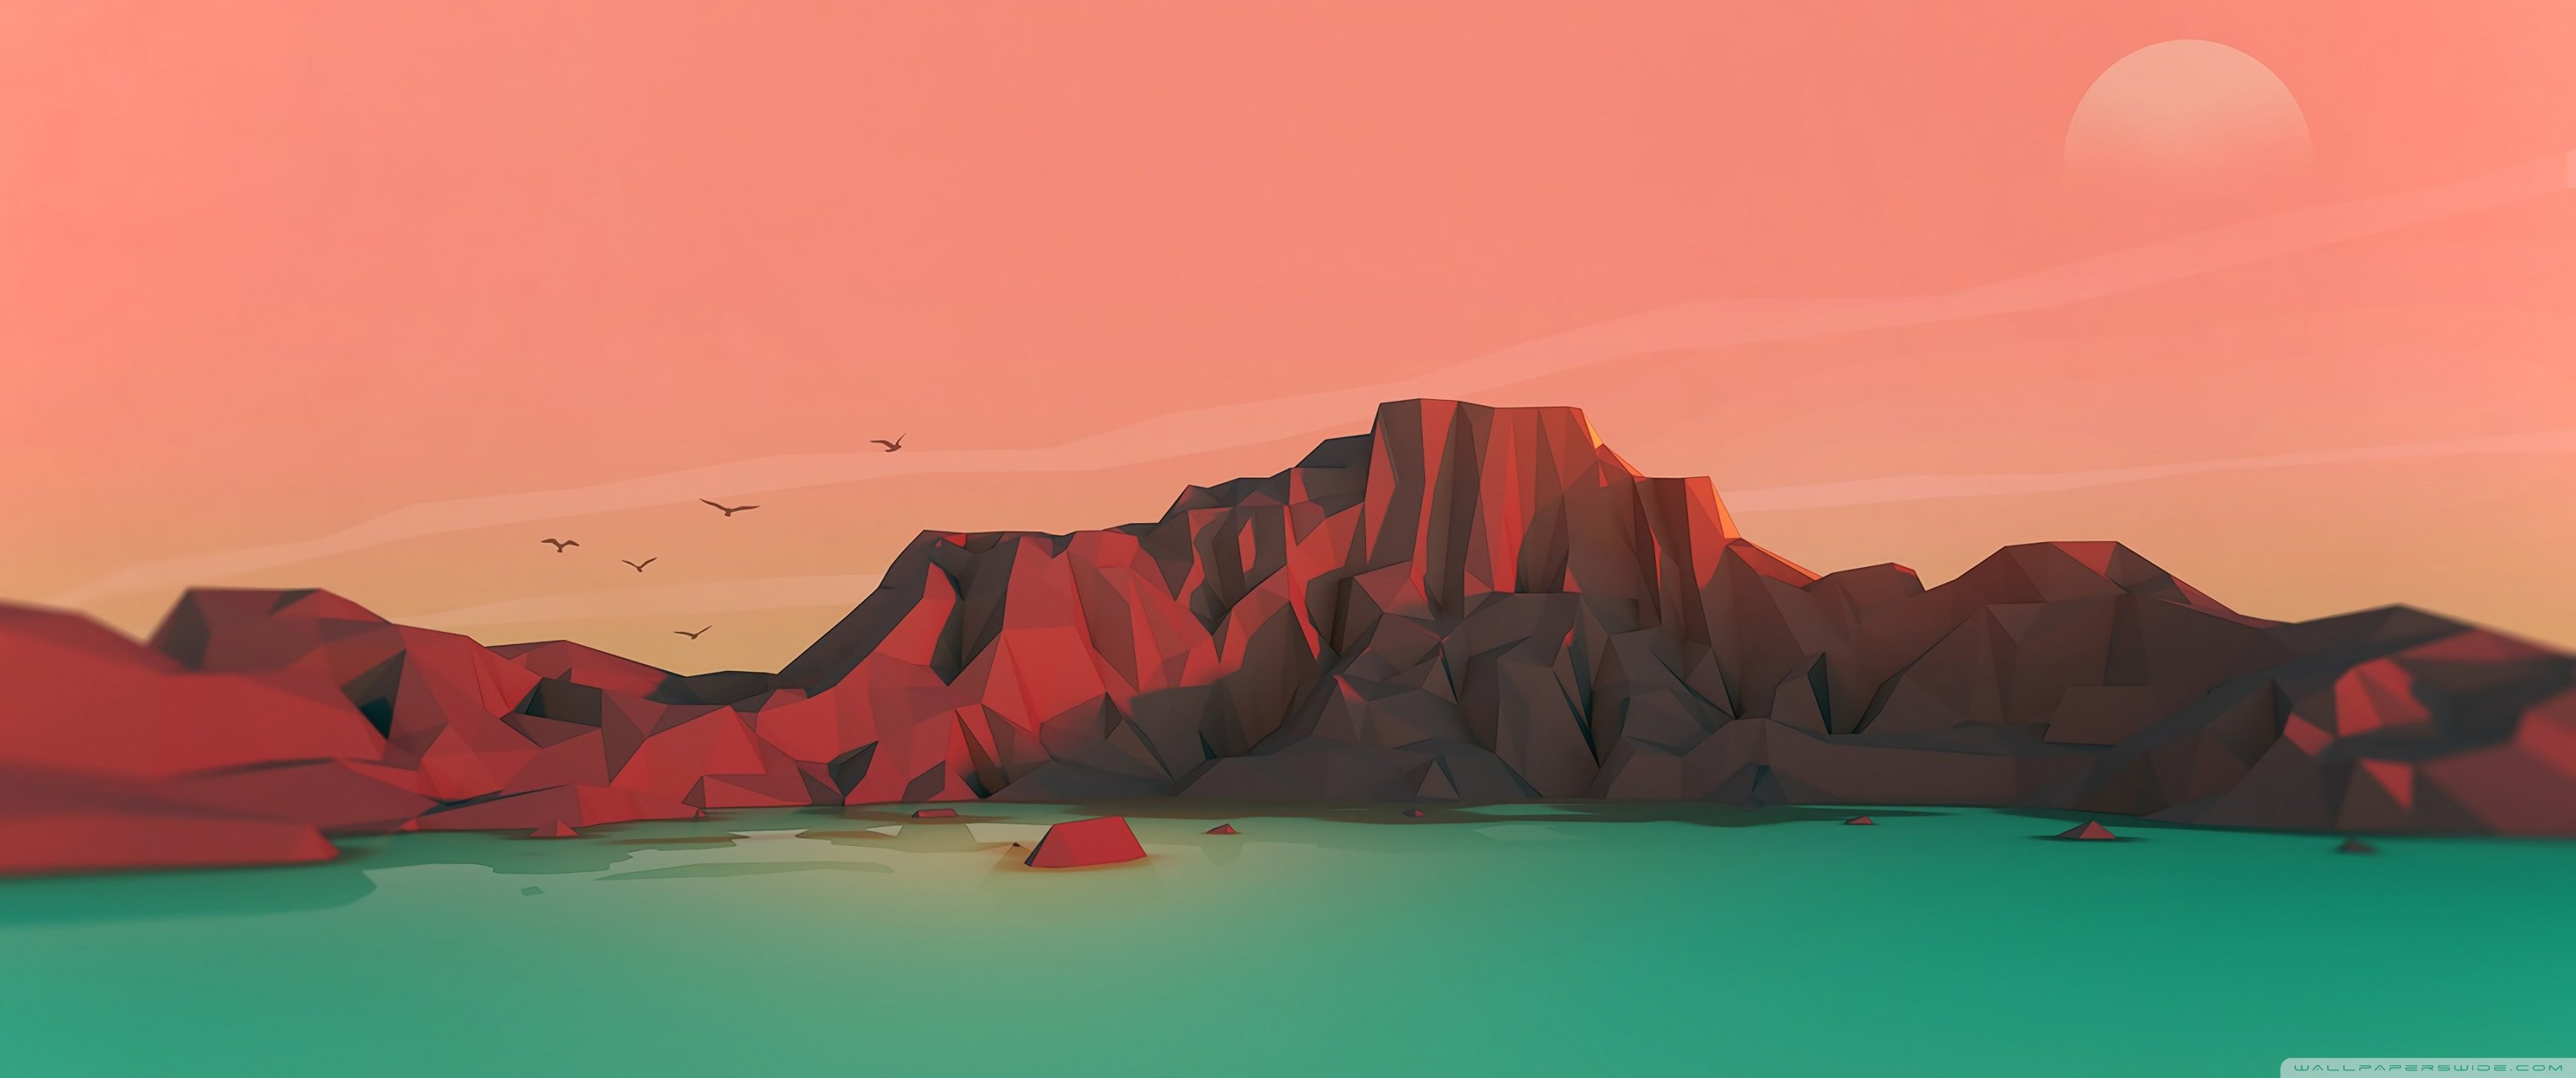 Low Poly Environment Ultra HD Desktop Background Wallpaper for: Multi Display, Dual & Triple Monitor, Tablet